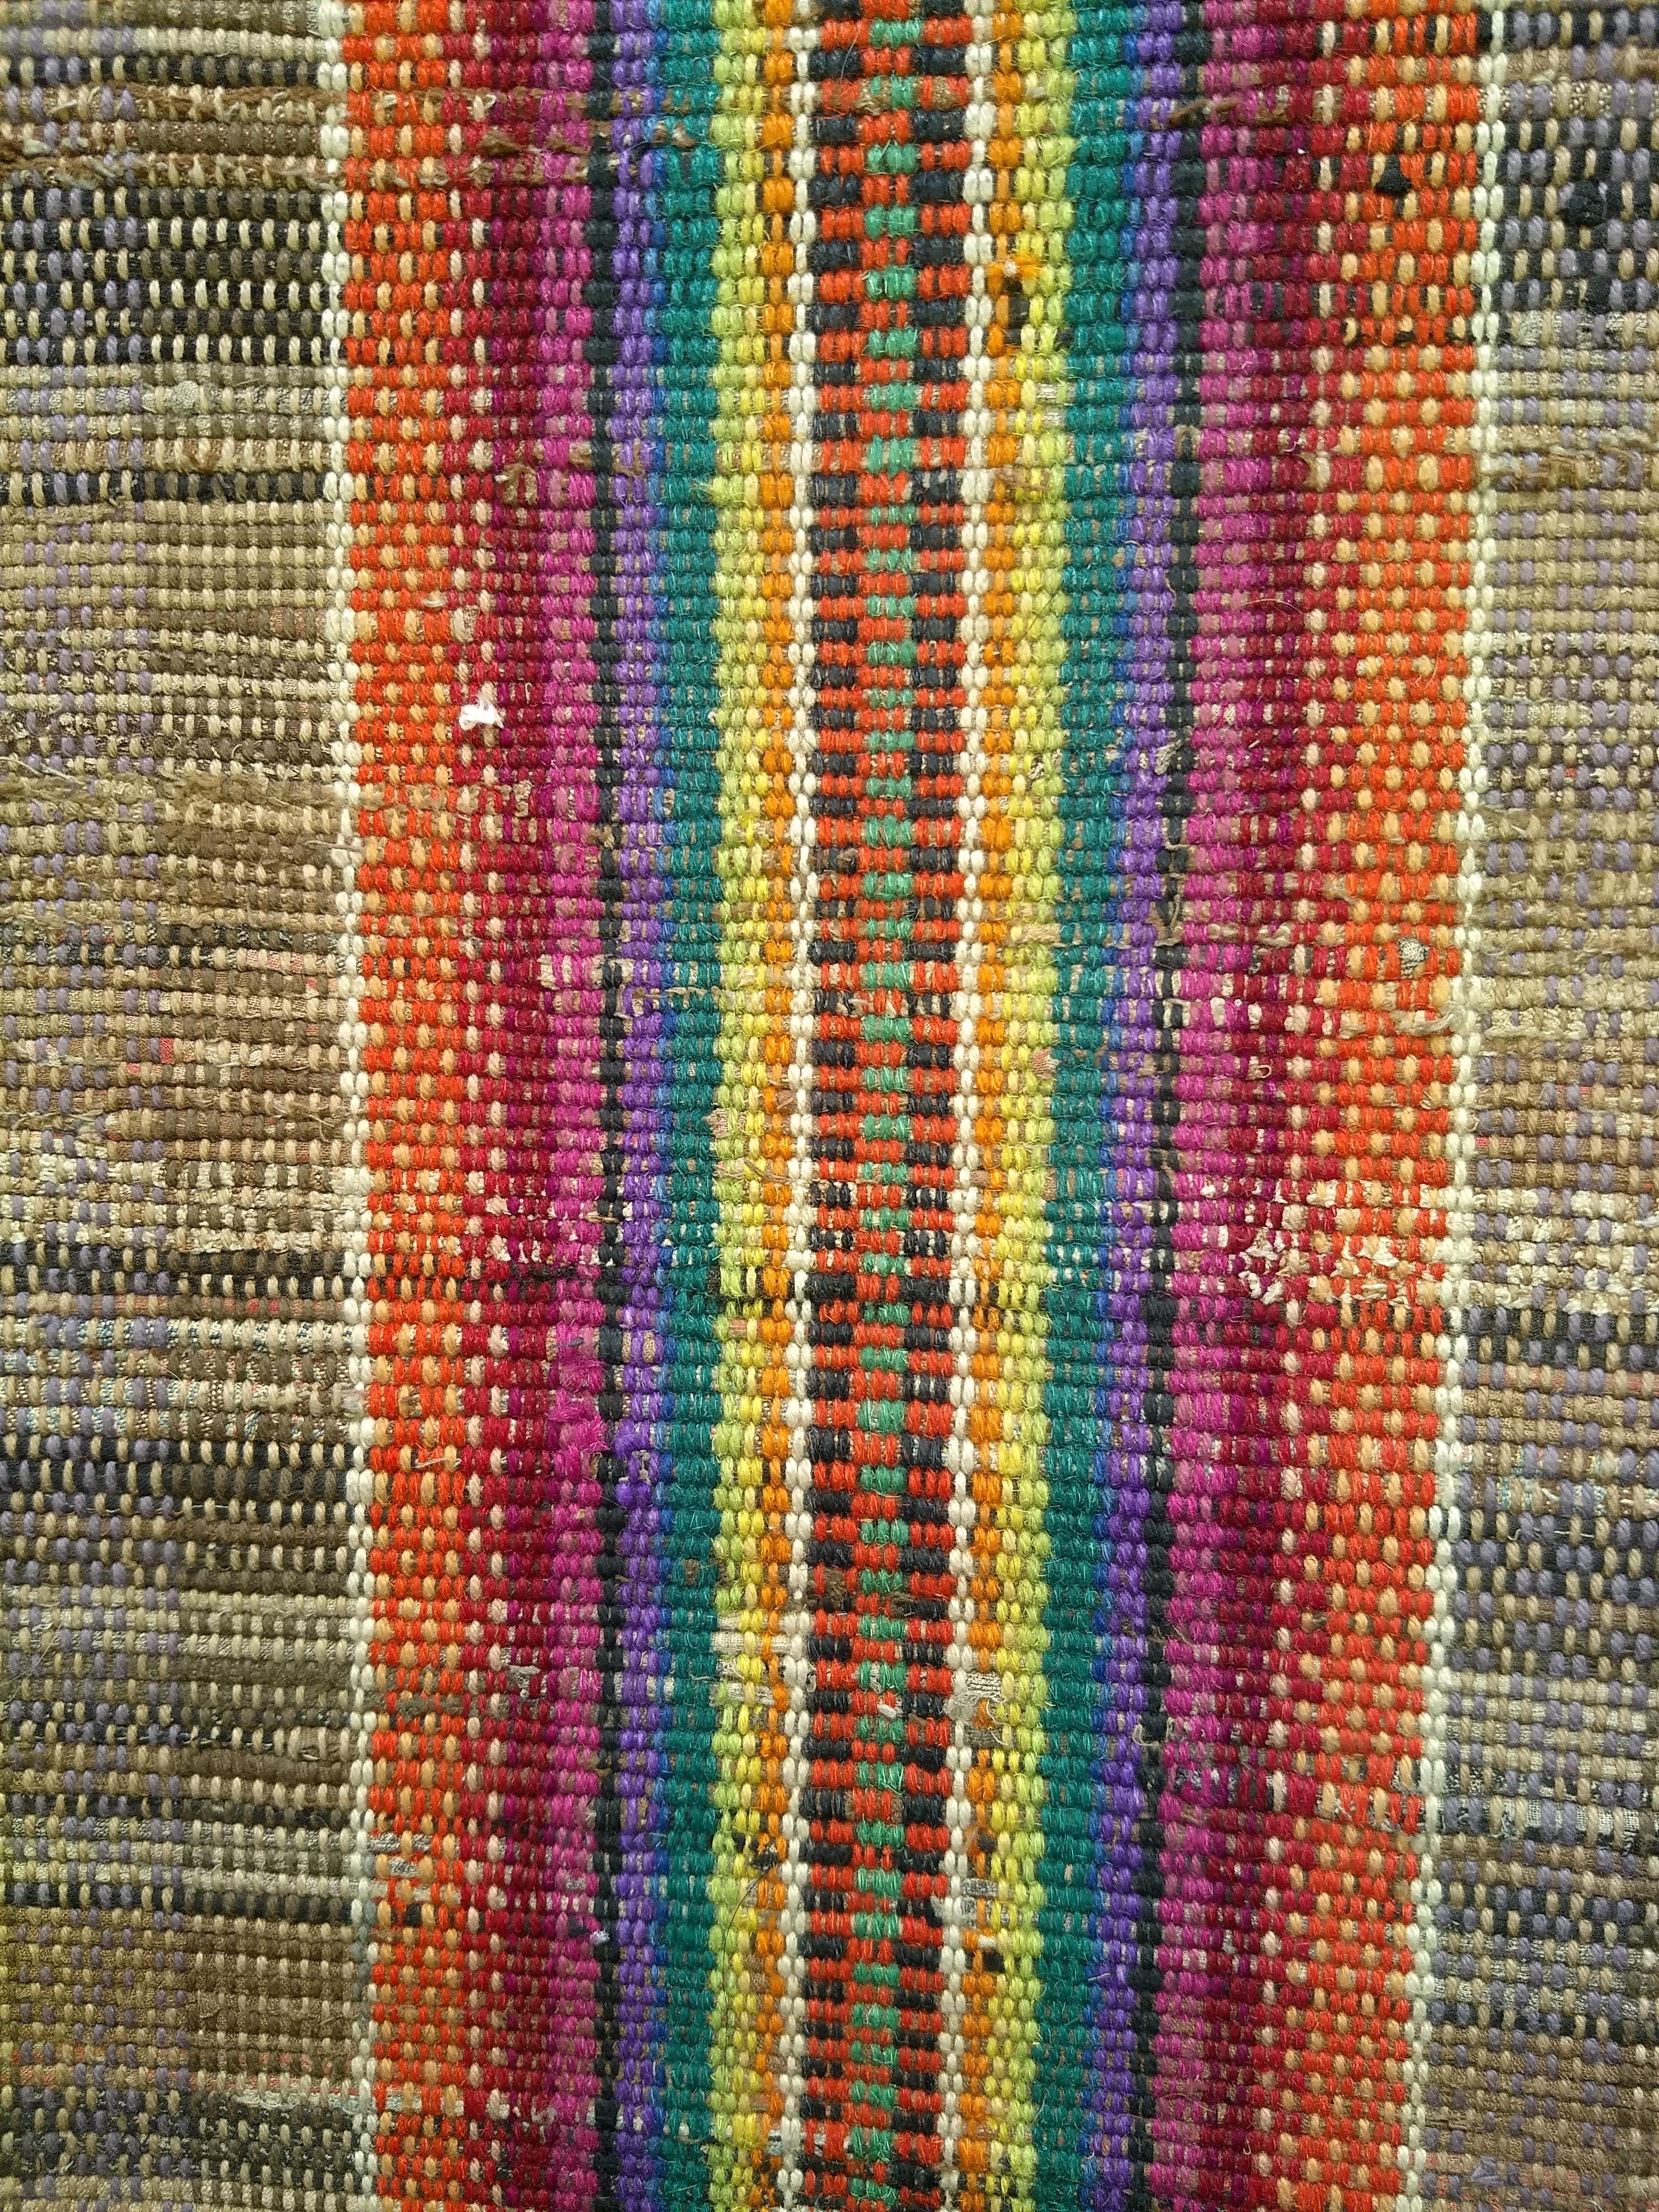 The vintage American rag runner in straw color with a rainbow colored stripe pattern in the center.  The hand-woven rag runner has a very modern design format and can be incorporated into any modern interior design project.  The rag runner can be